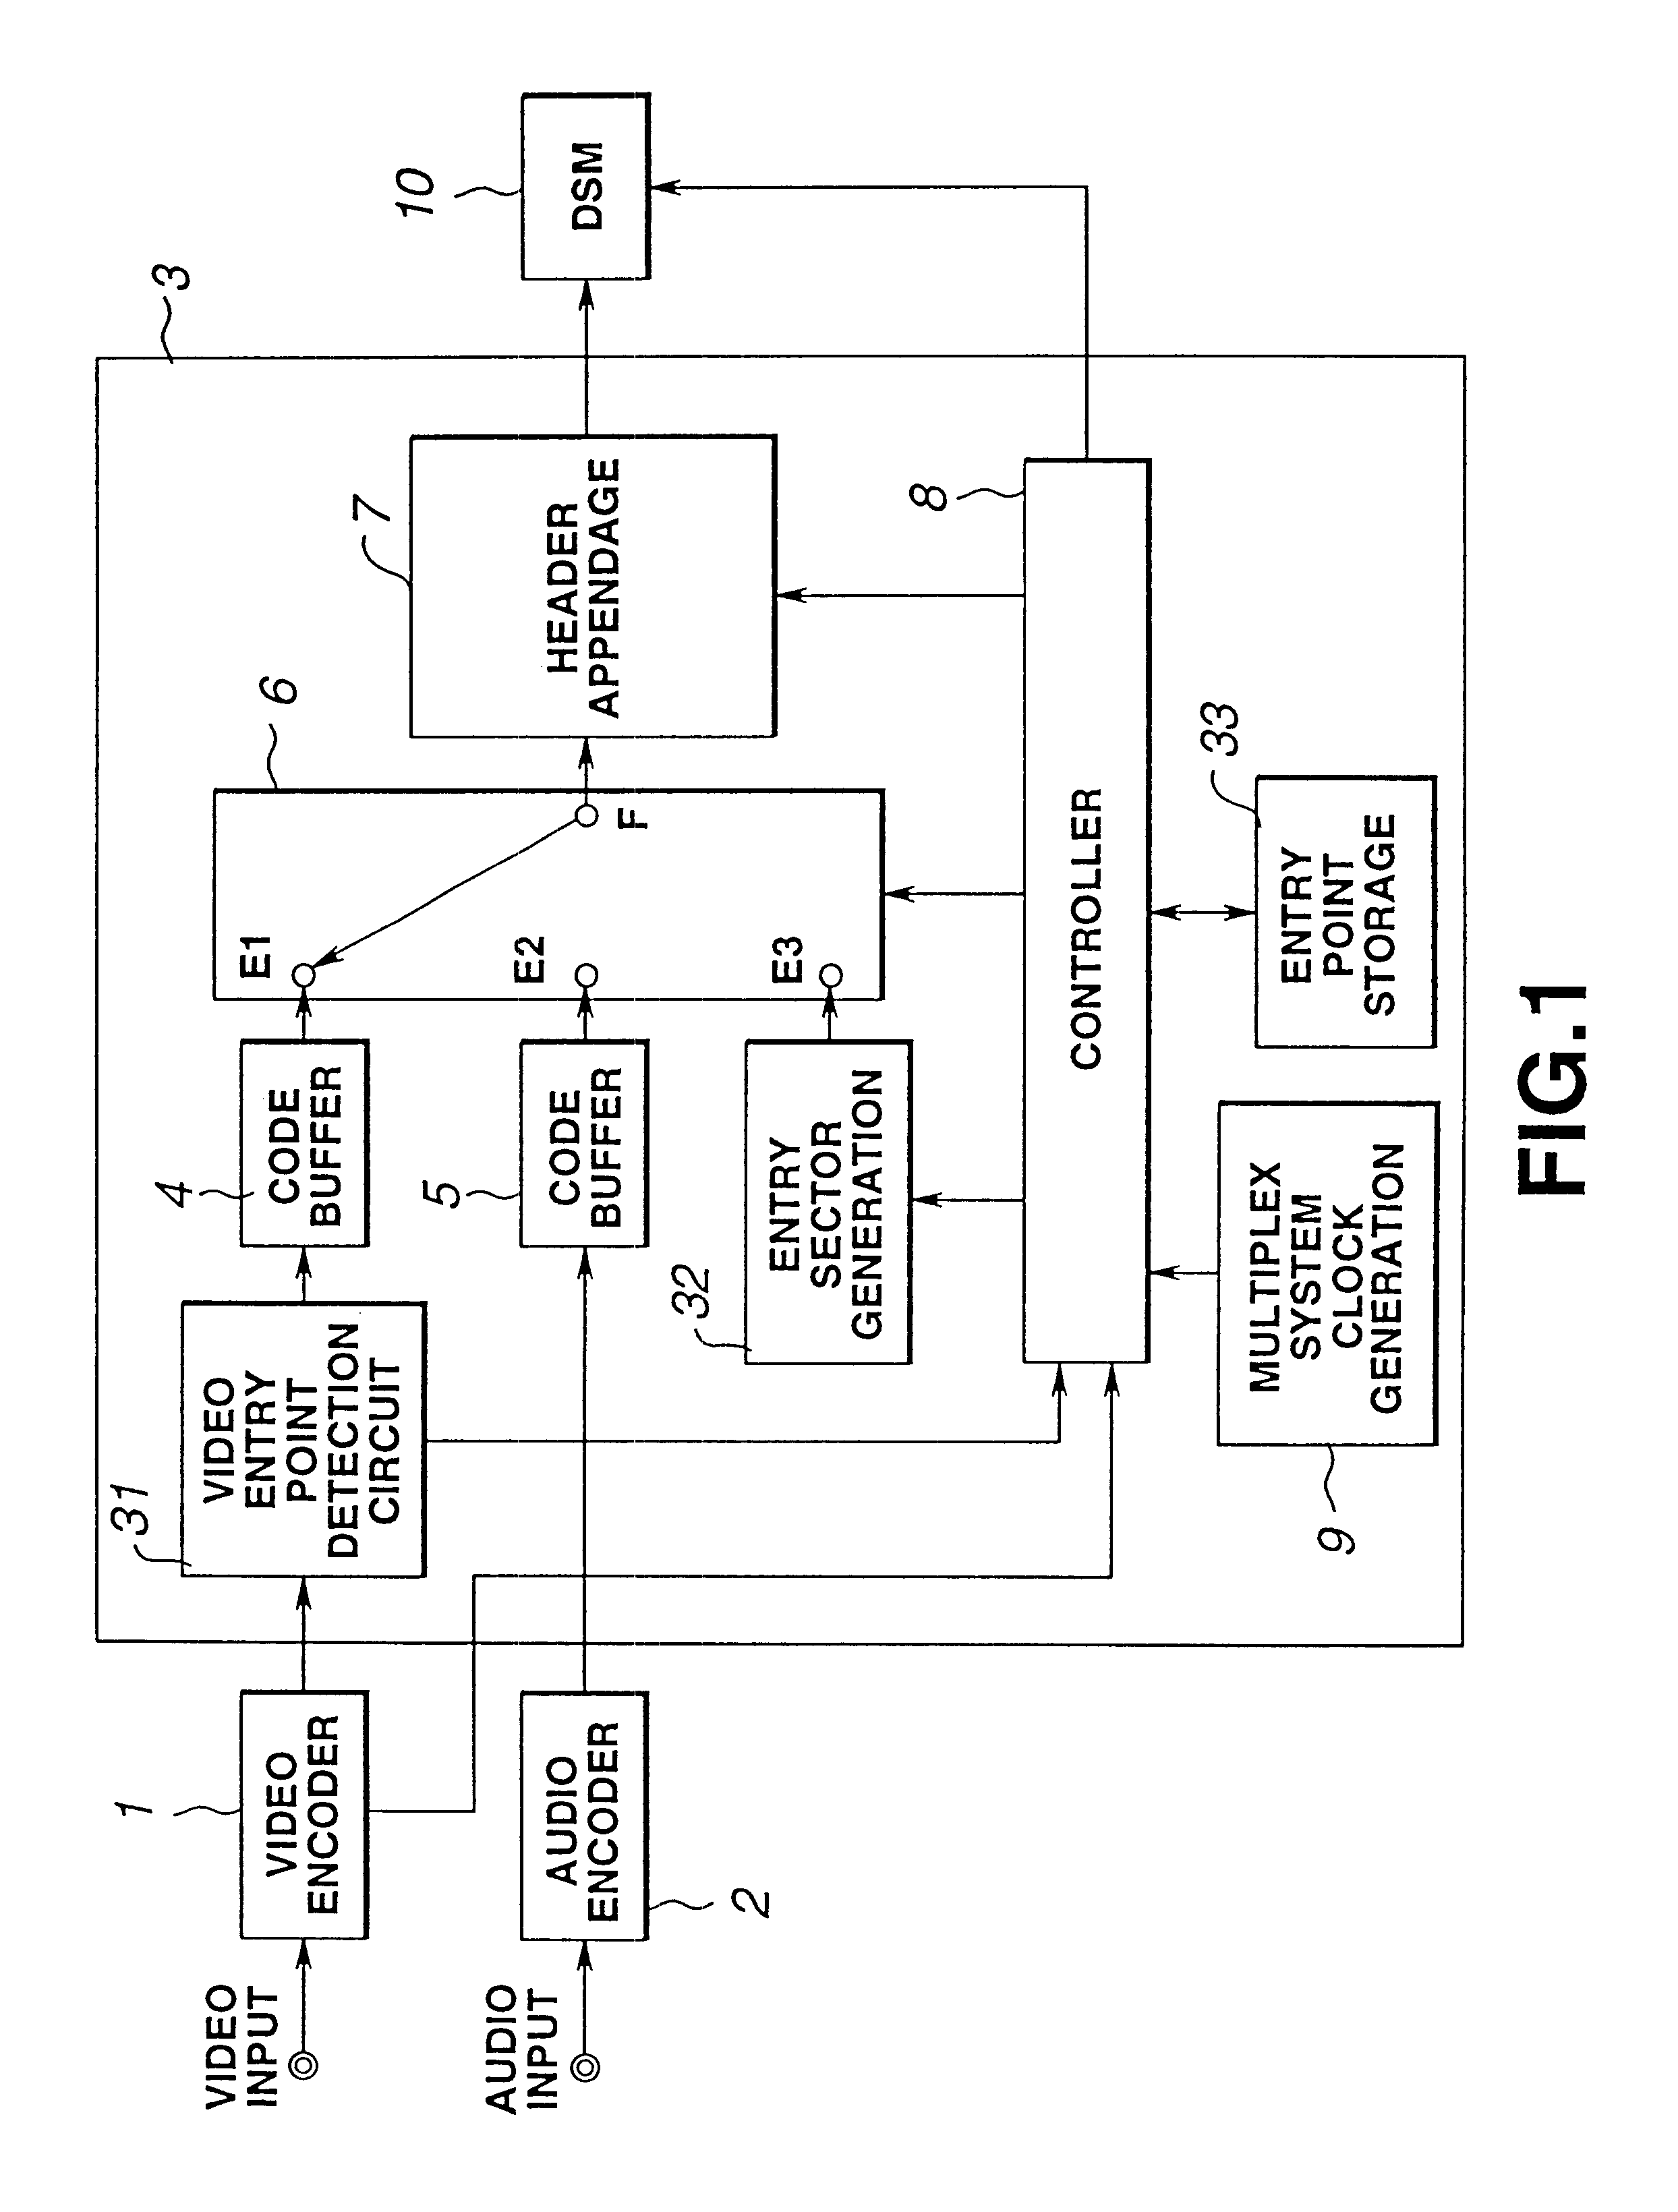 Apparatus and method for encoding and decoding digital video data